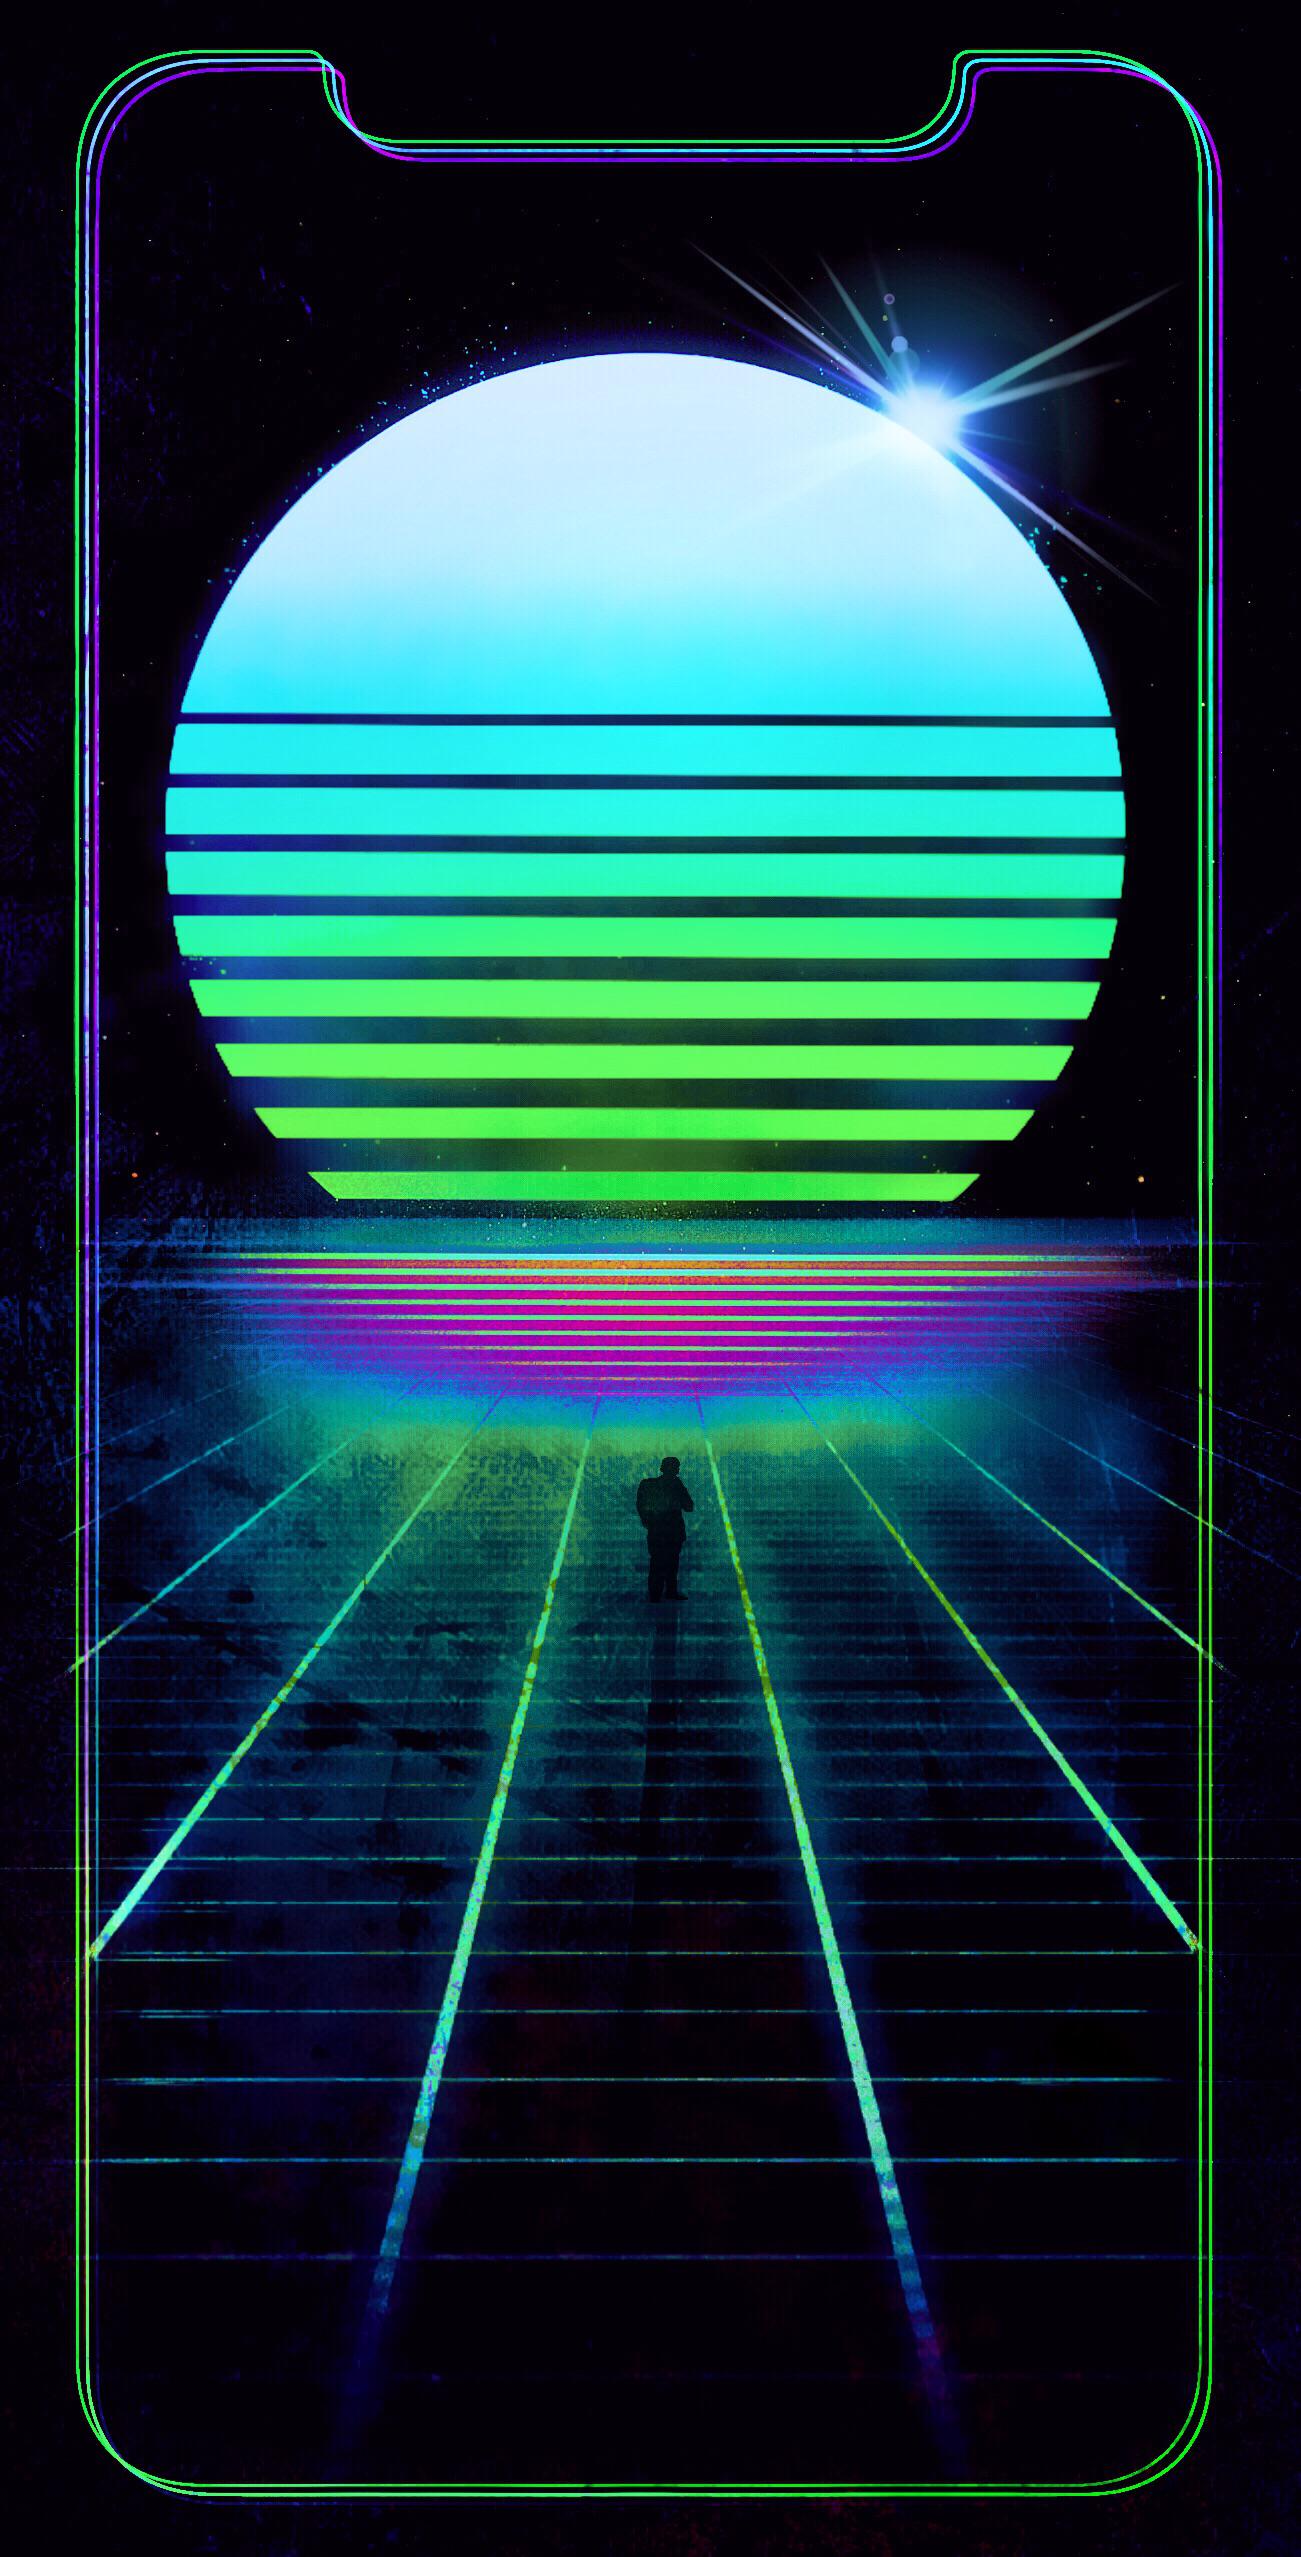 Synthwave iPhone X wallpaper